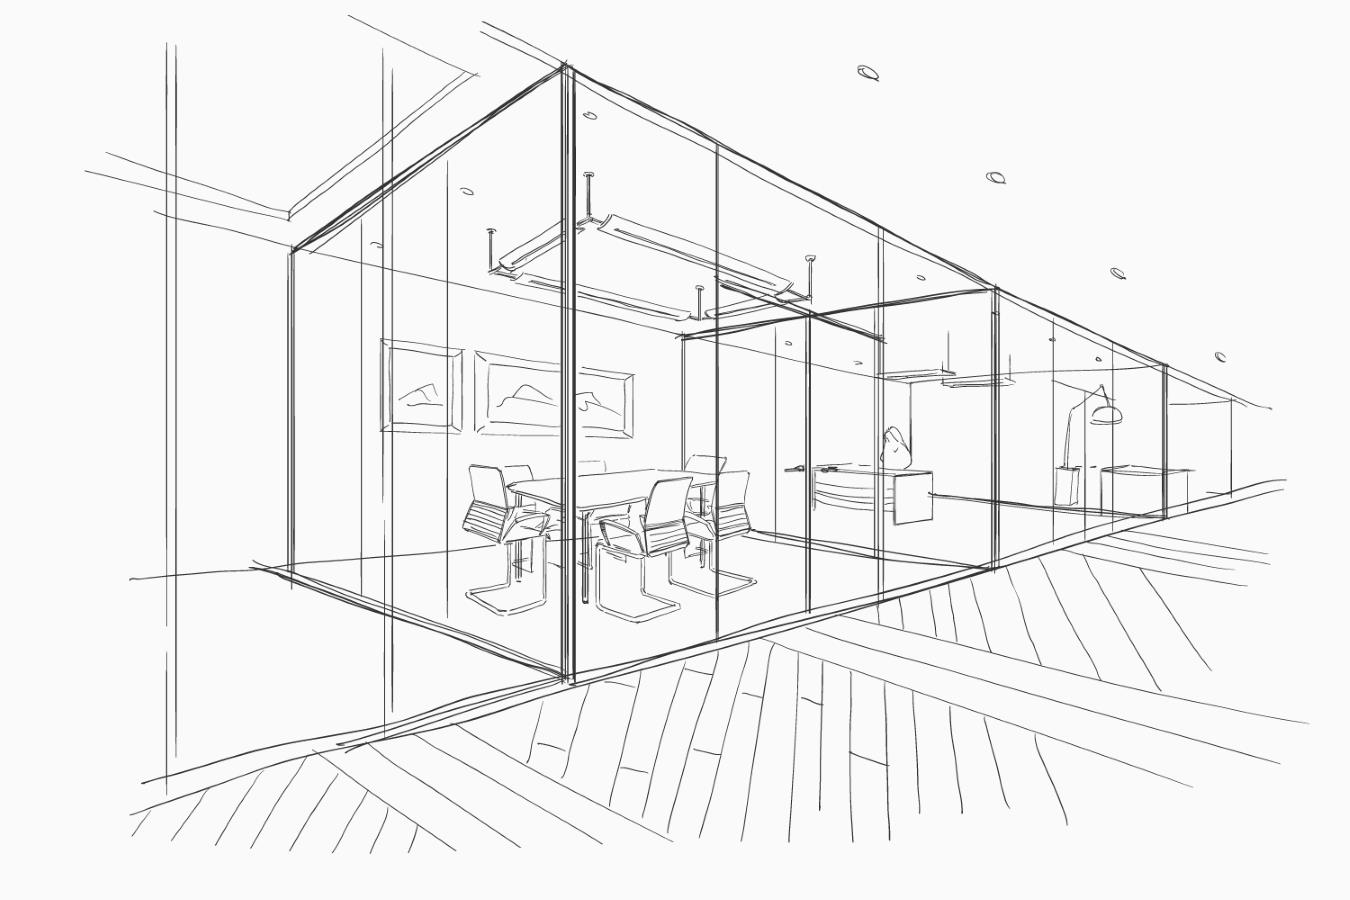 Hand drawn architectural sketch of an offices conference room and its lighting